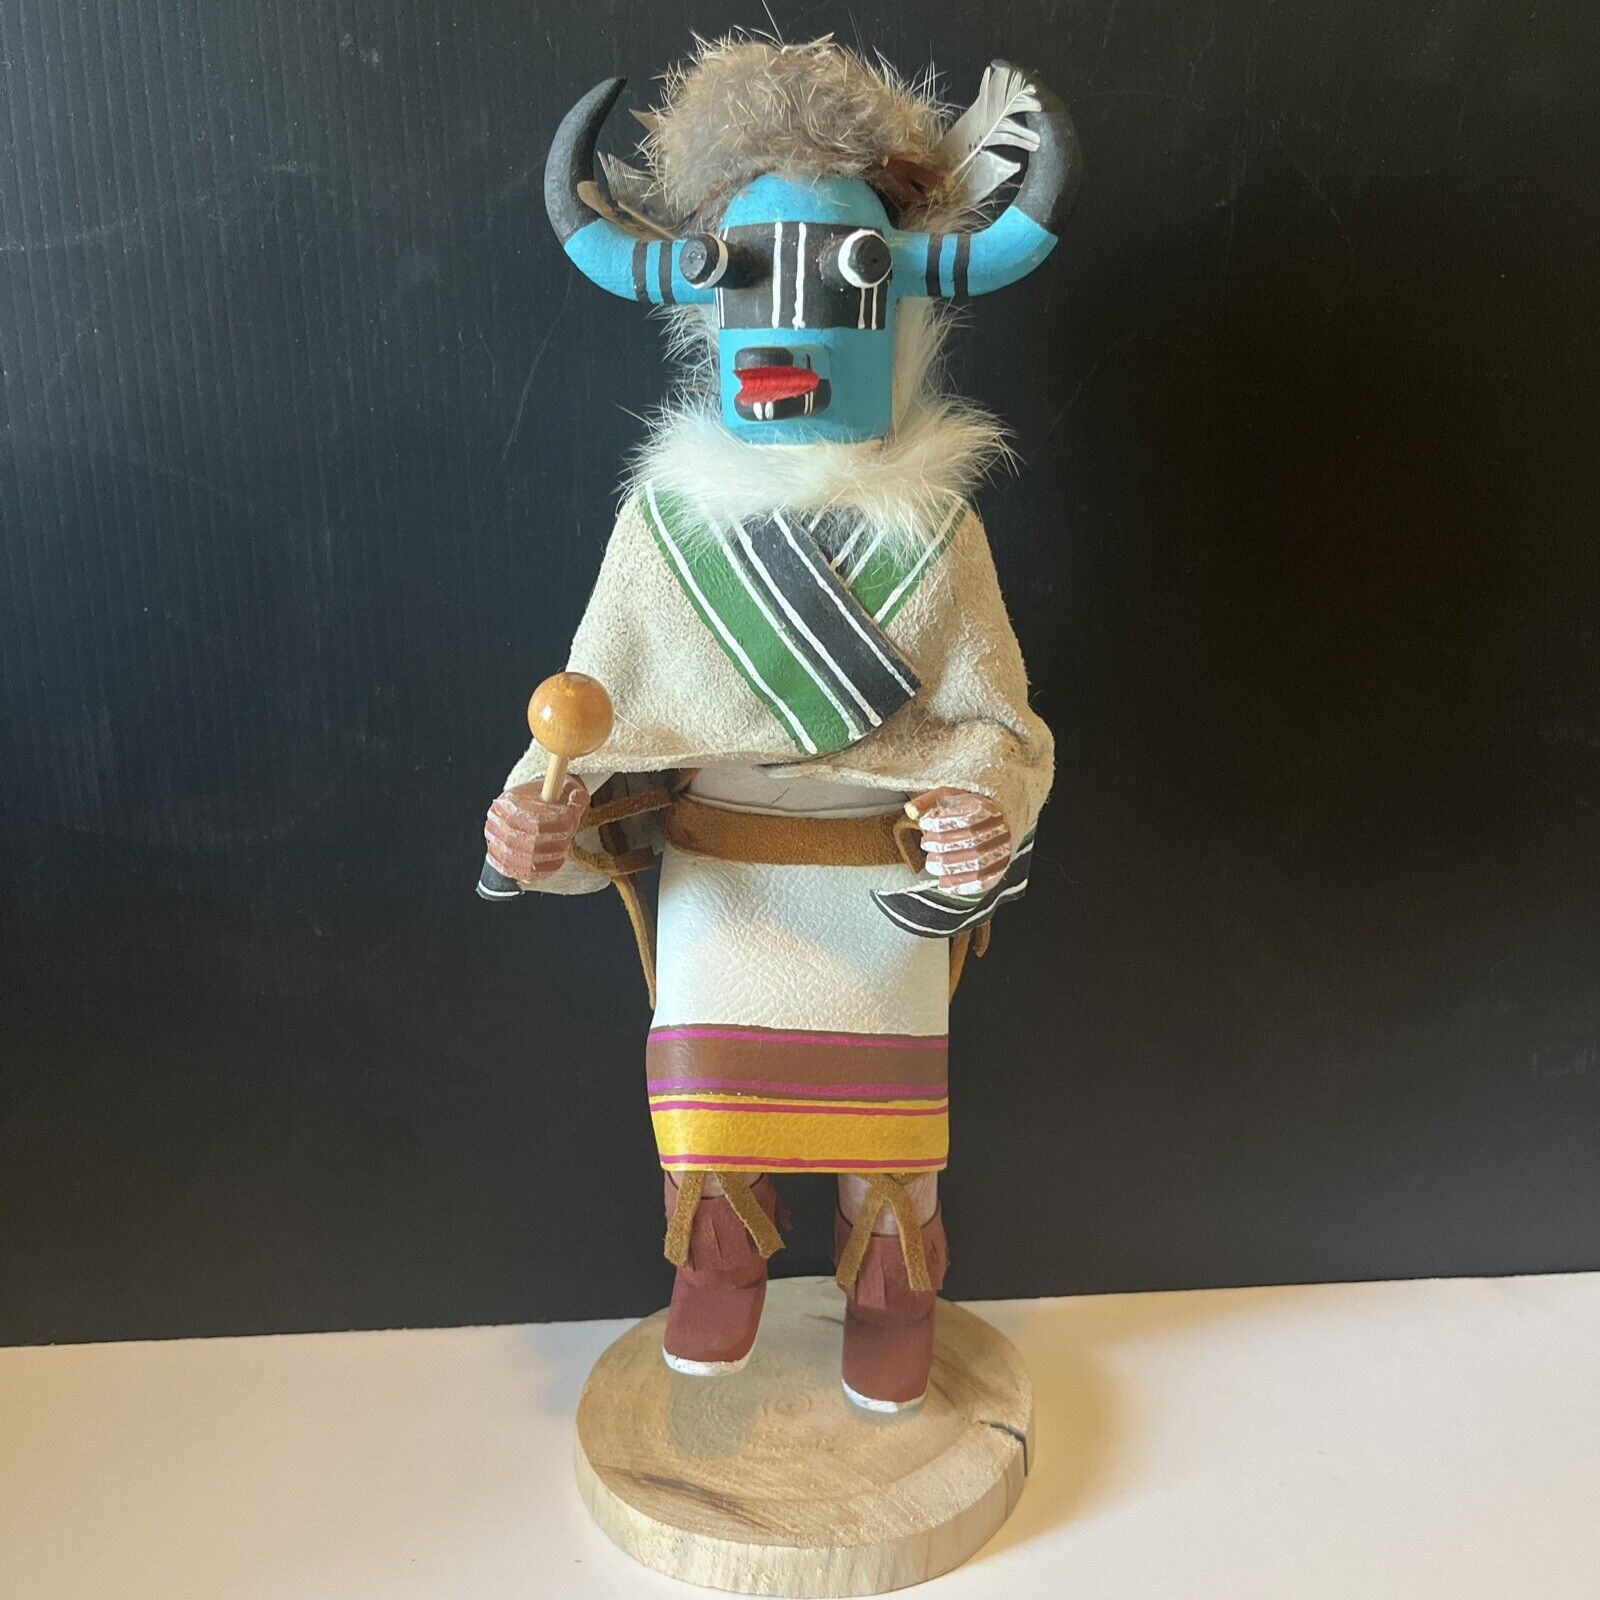 Kachina Doll - Zuni Shalako Wood Carving by R.Y. Native American Good Fortune